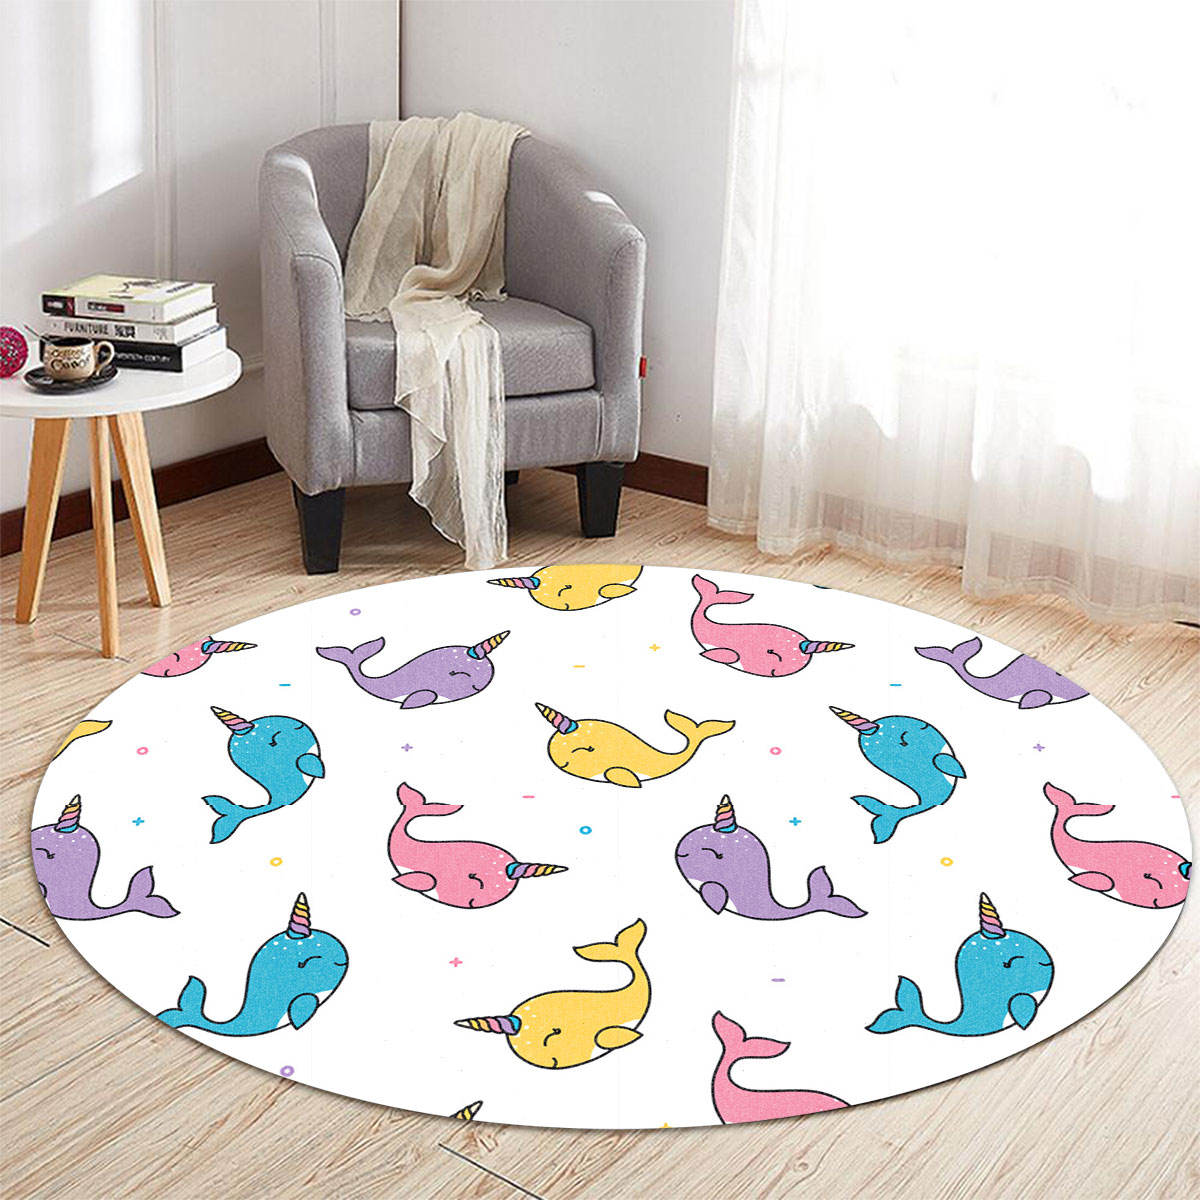 Colorful Happy Narwhal Round Carpet